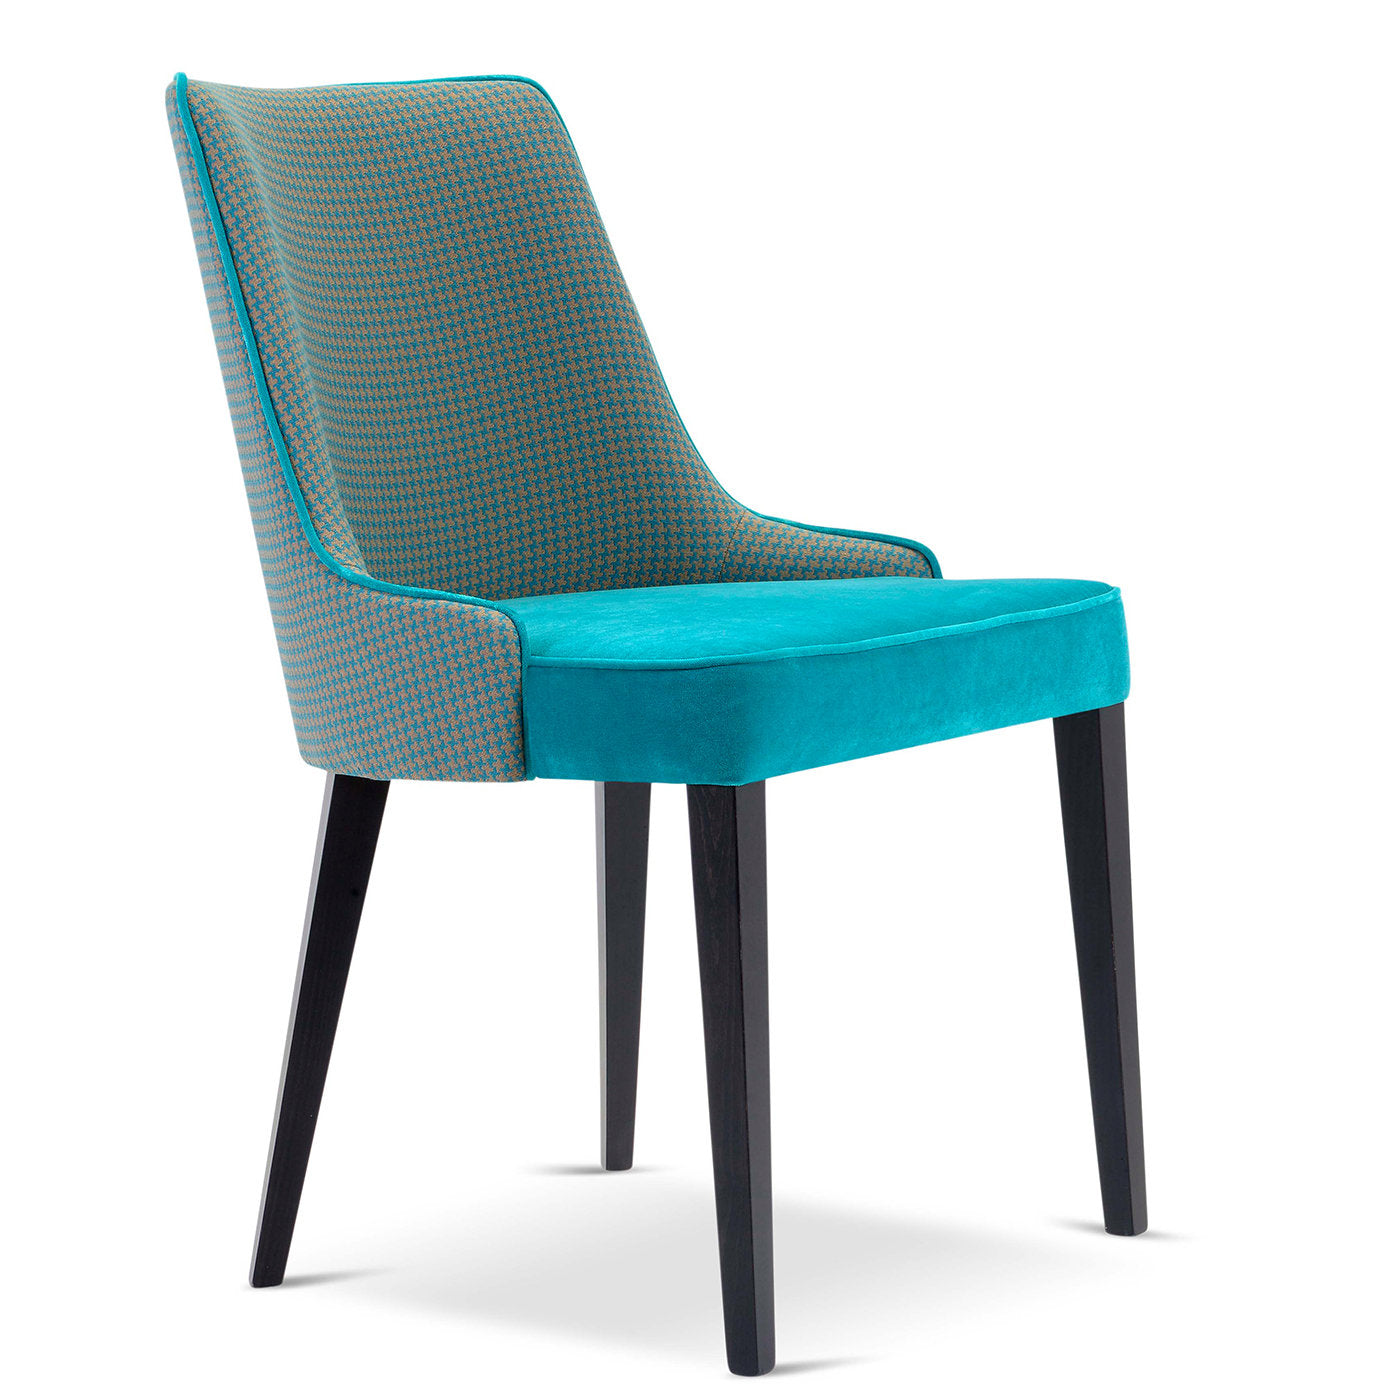 Pat Turquoise/Gray Chair - Alternative view 2